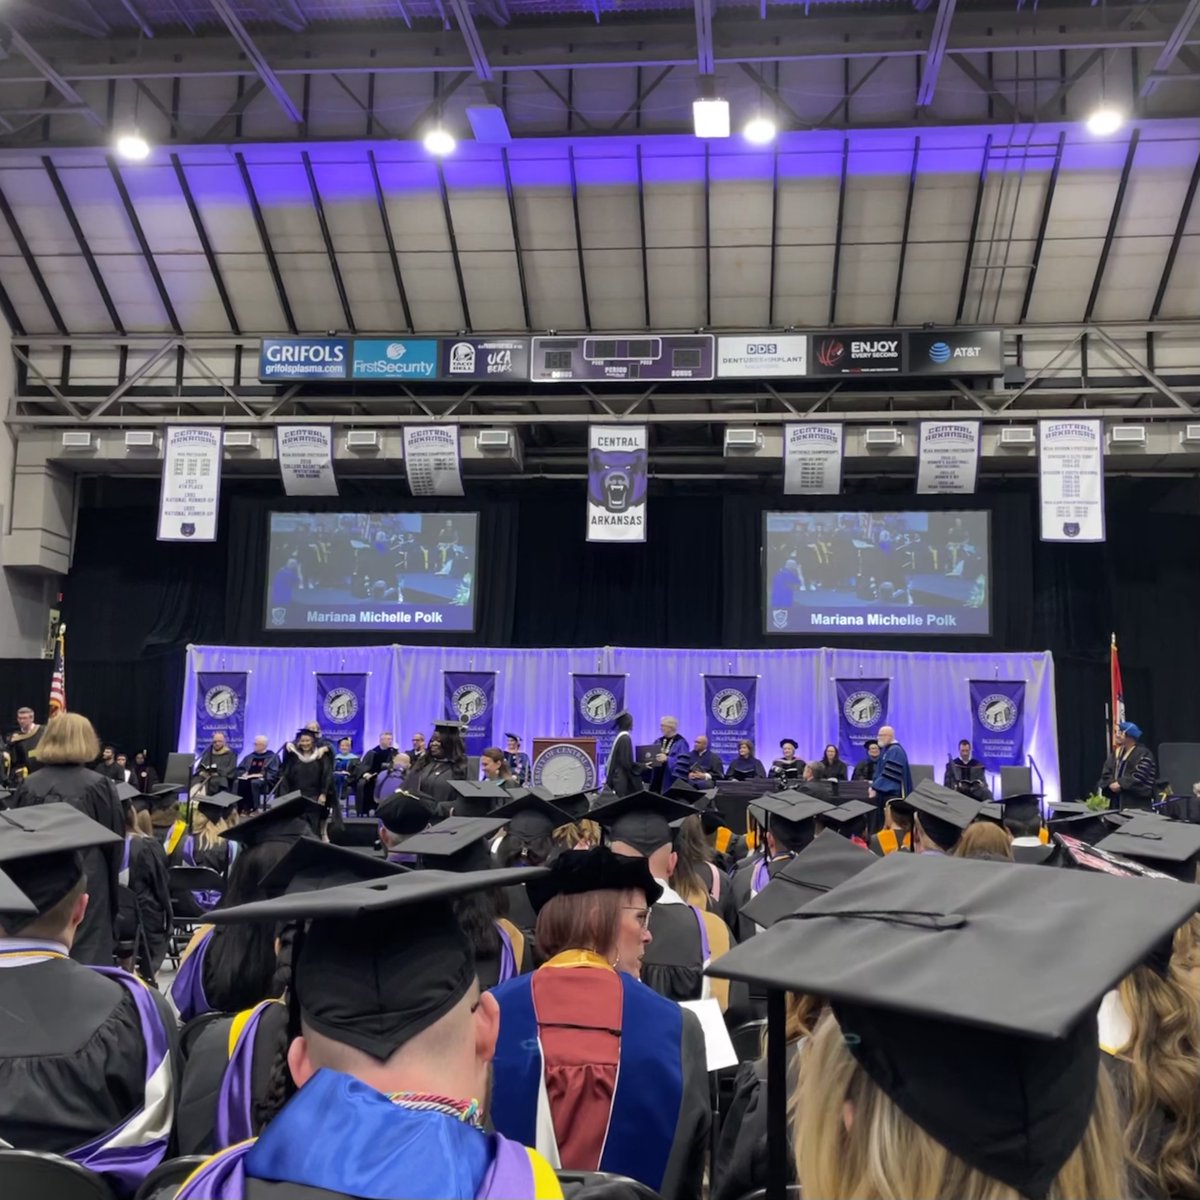 Congrats to all the amazing @UCA_EXSS Sport Mgmt Master's students graduating today! 🎉
You are now ready to make a positive impact on the sport industry around the world! Keep pushing the boundaries and making a difference! Go Bears! @UCAGradSchool #SportMgmt 🎓👨‍🎓👩‍🎓